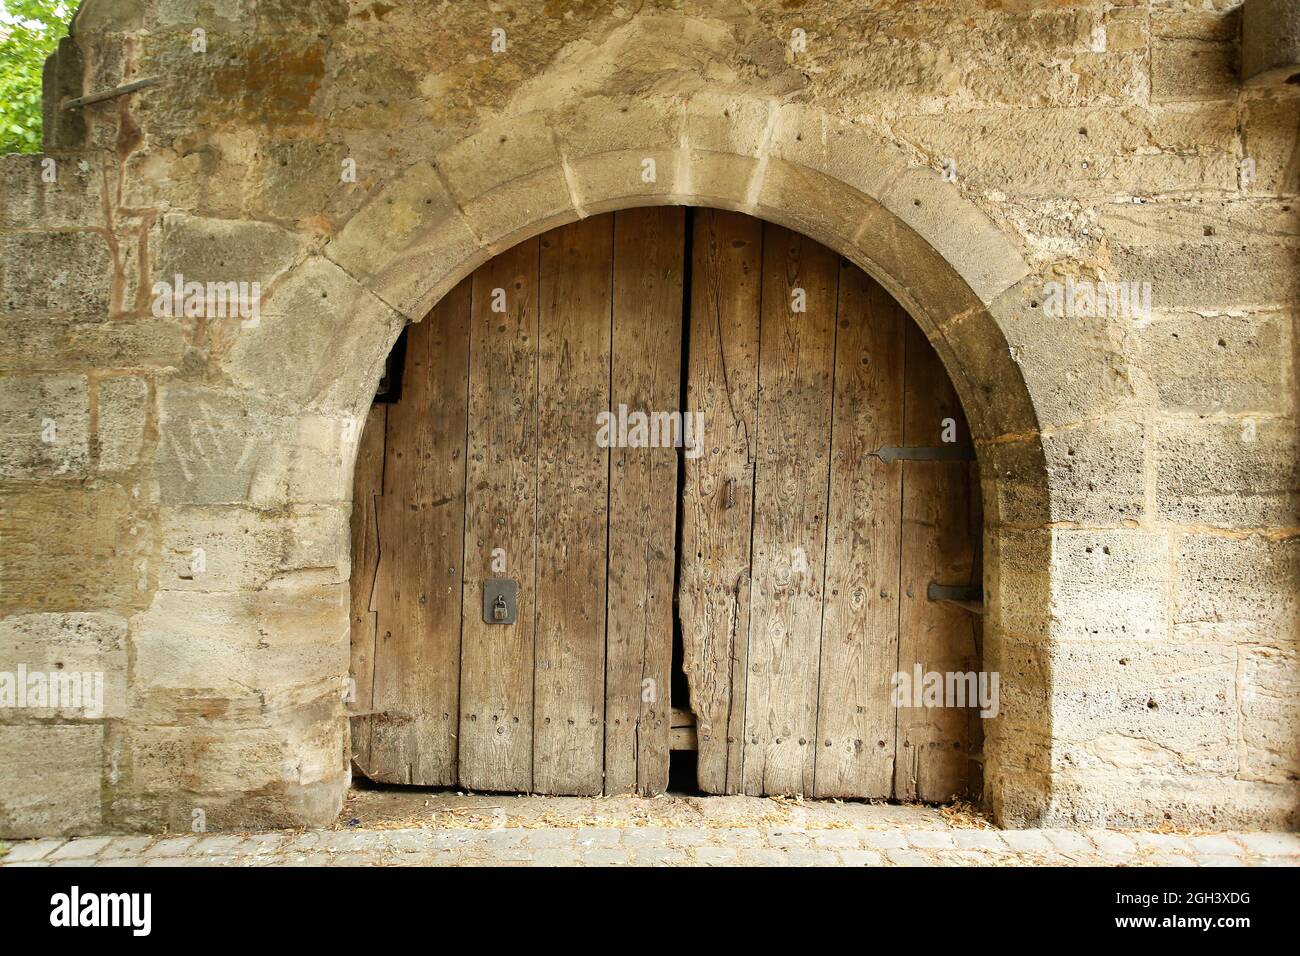 An old wooden door, taken from the street, Rothenberg, Germany Stock Photo